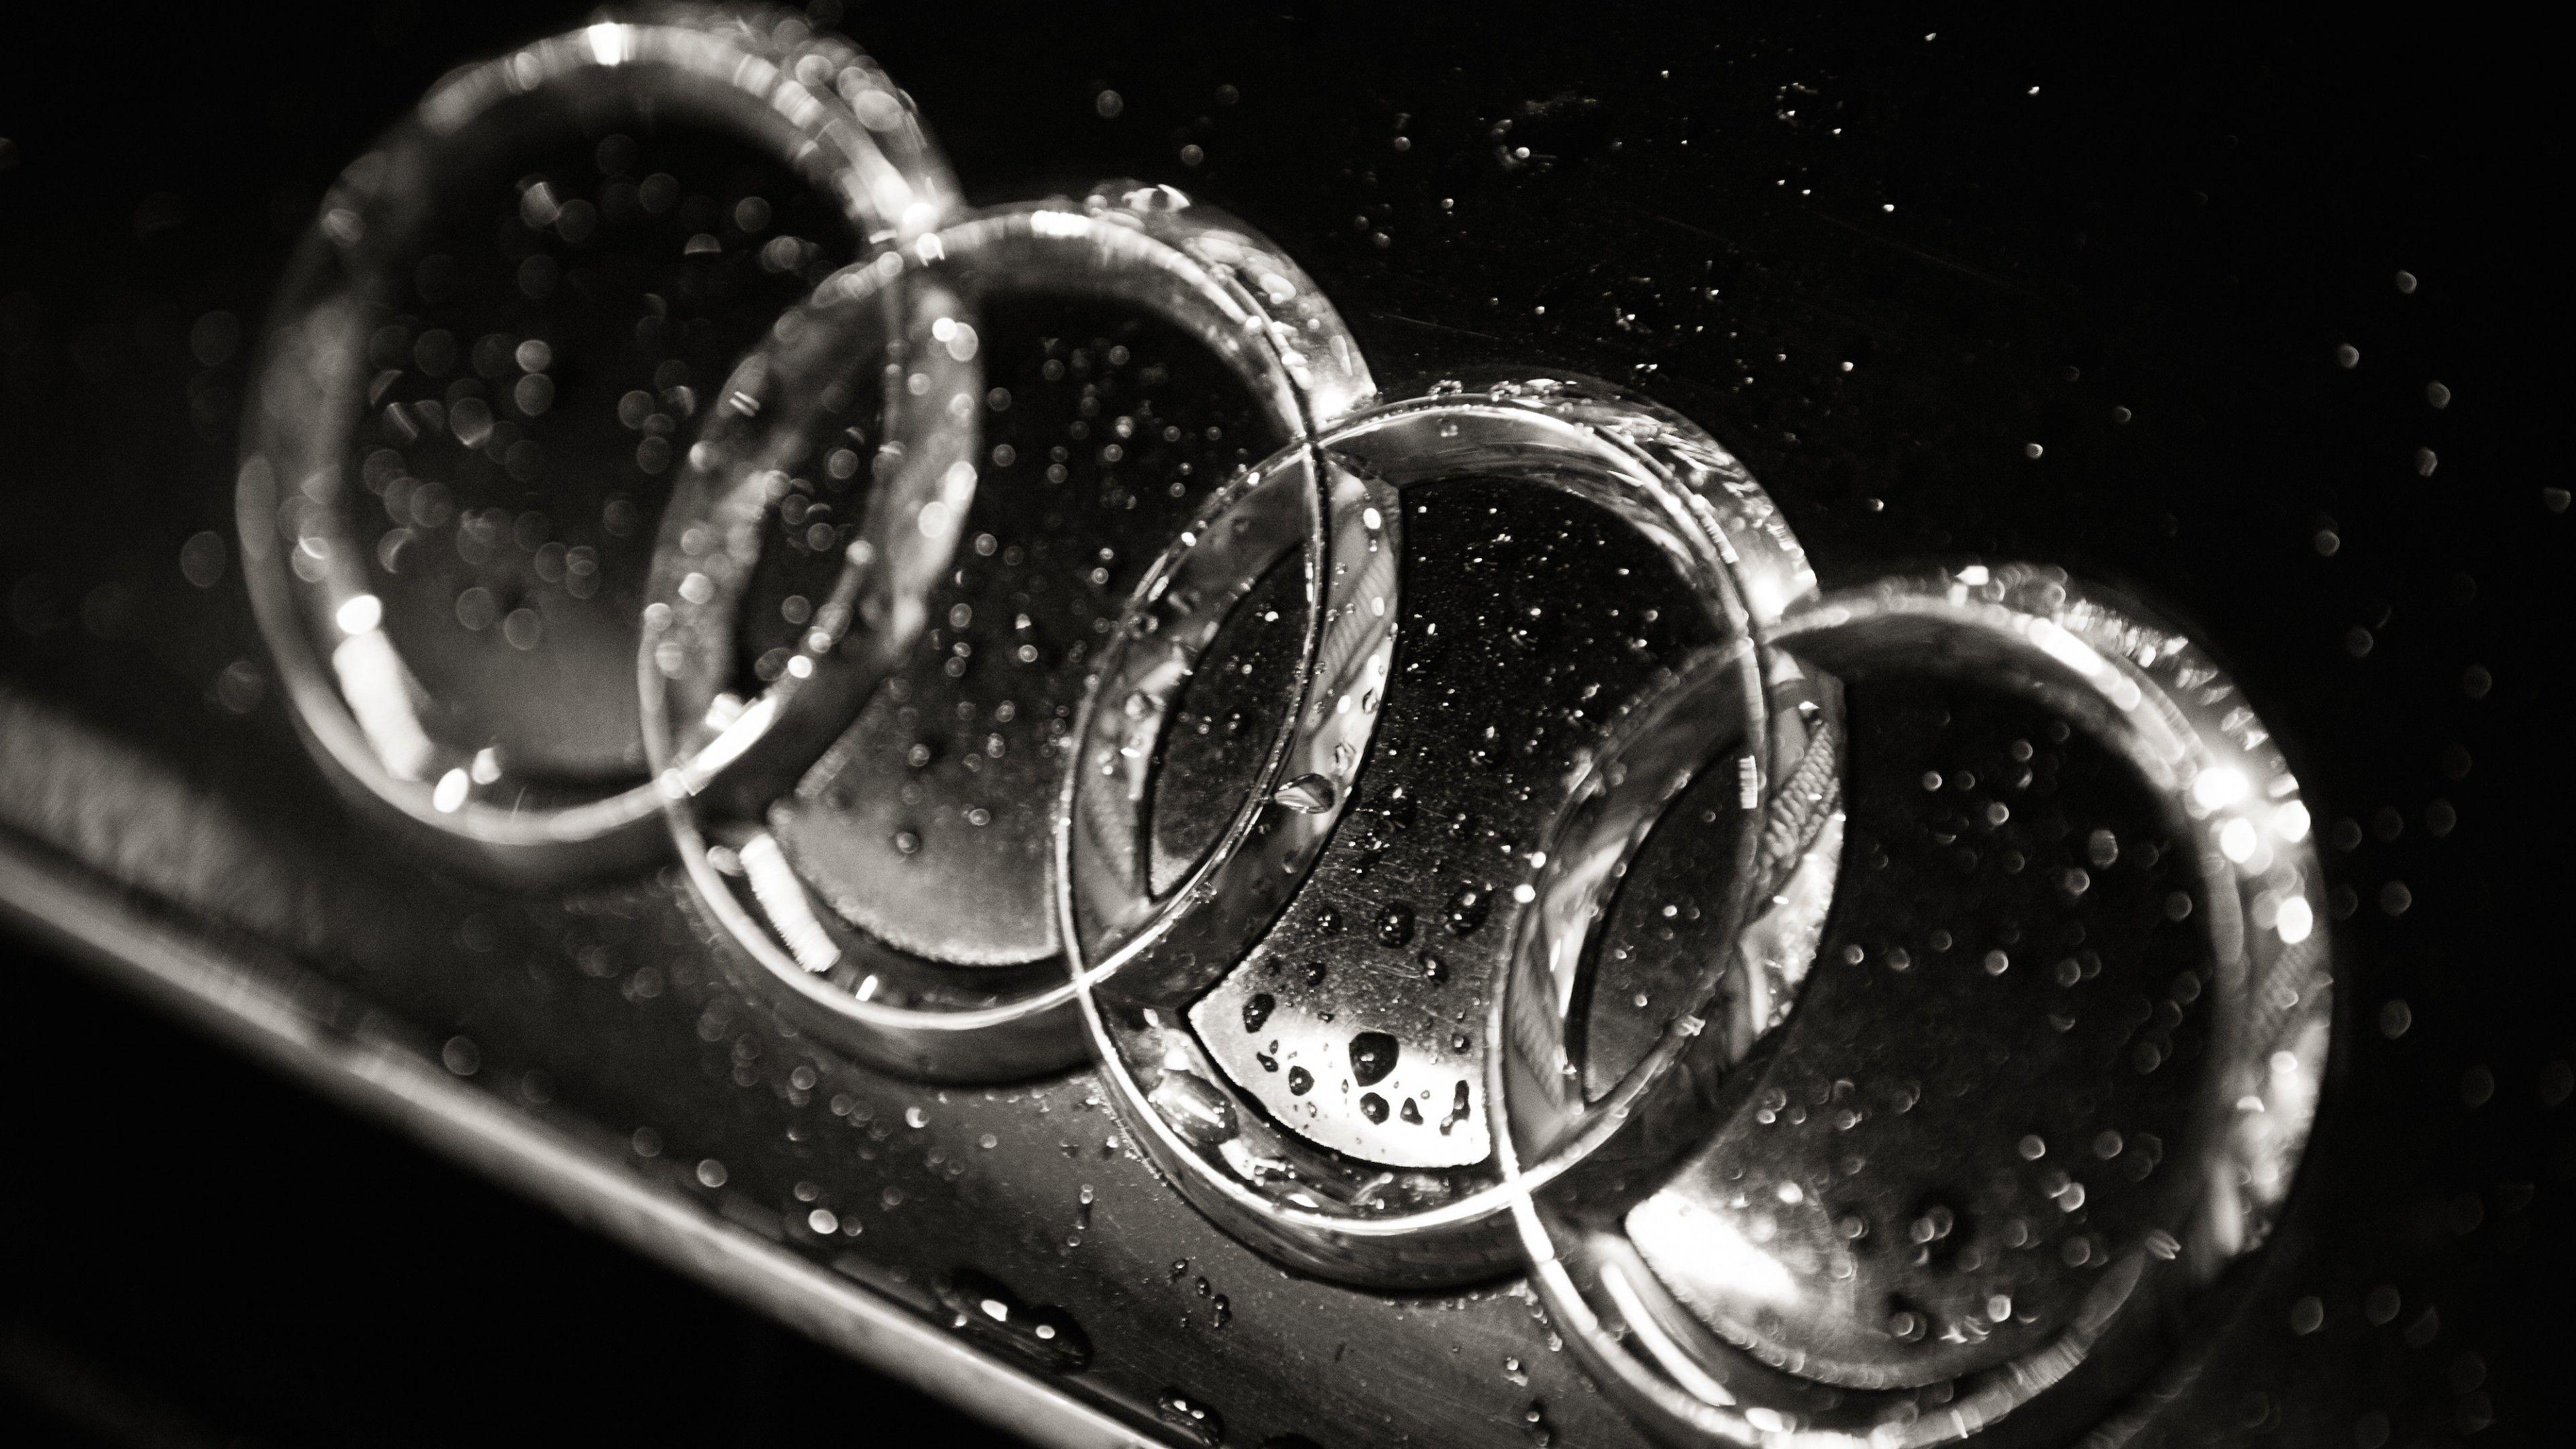 4K-resolution Black and White Logo - Audi Logo Wallpapers, Pictures, Images